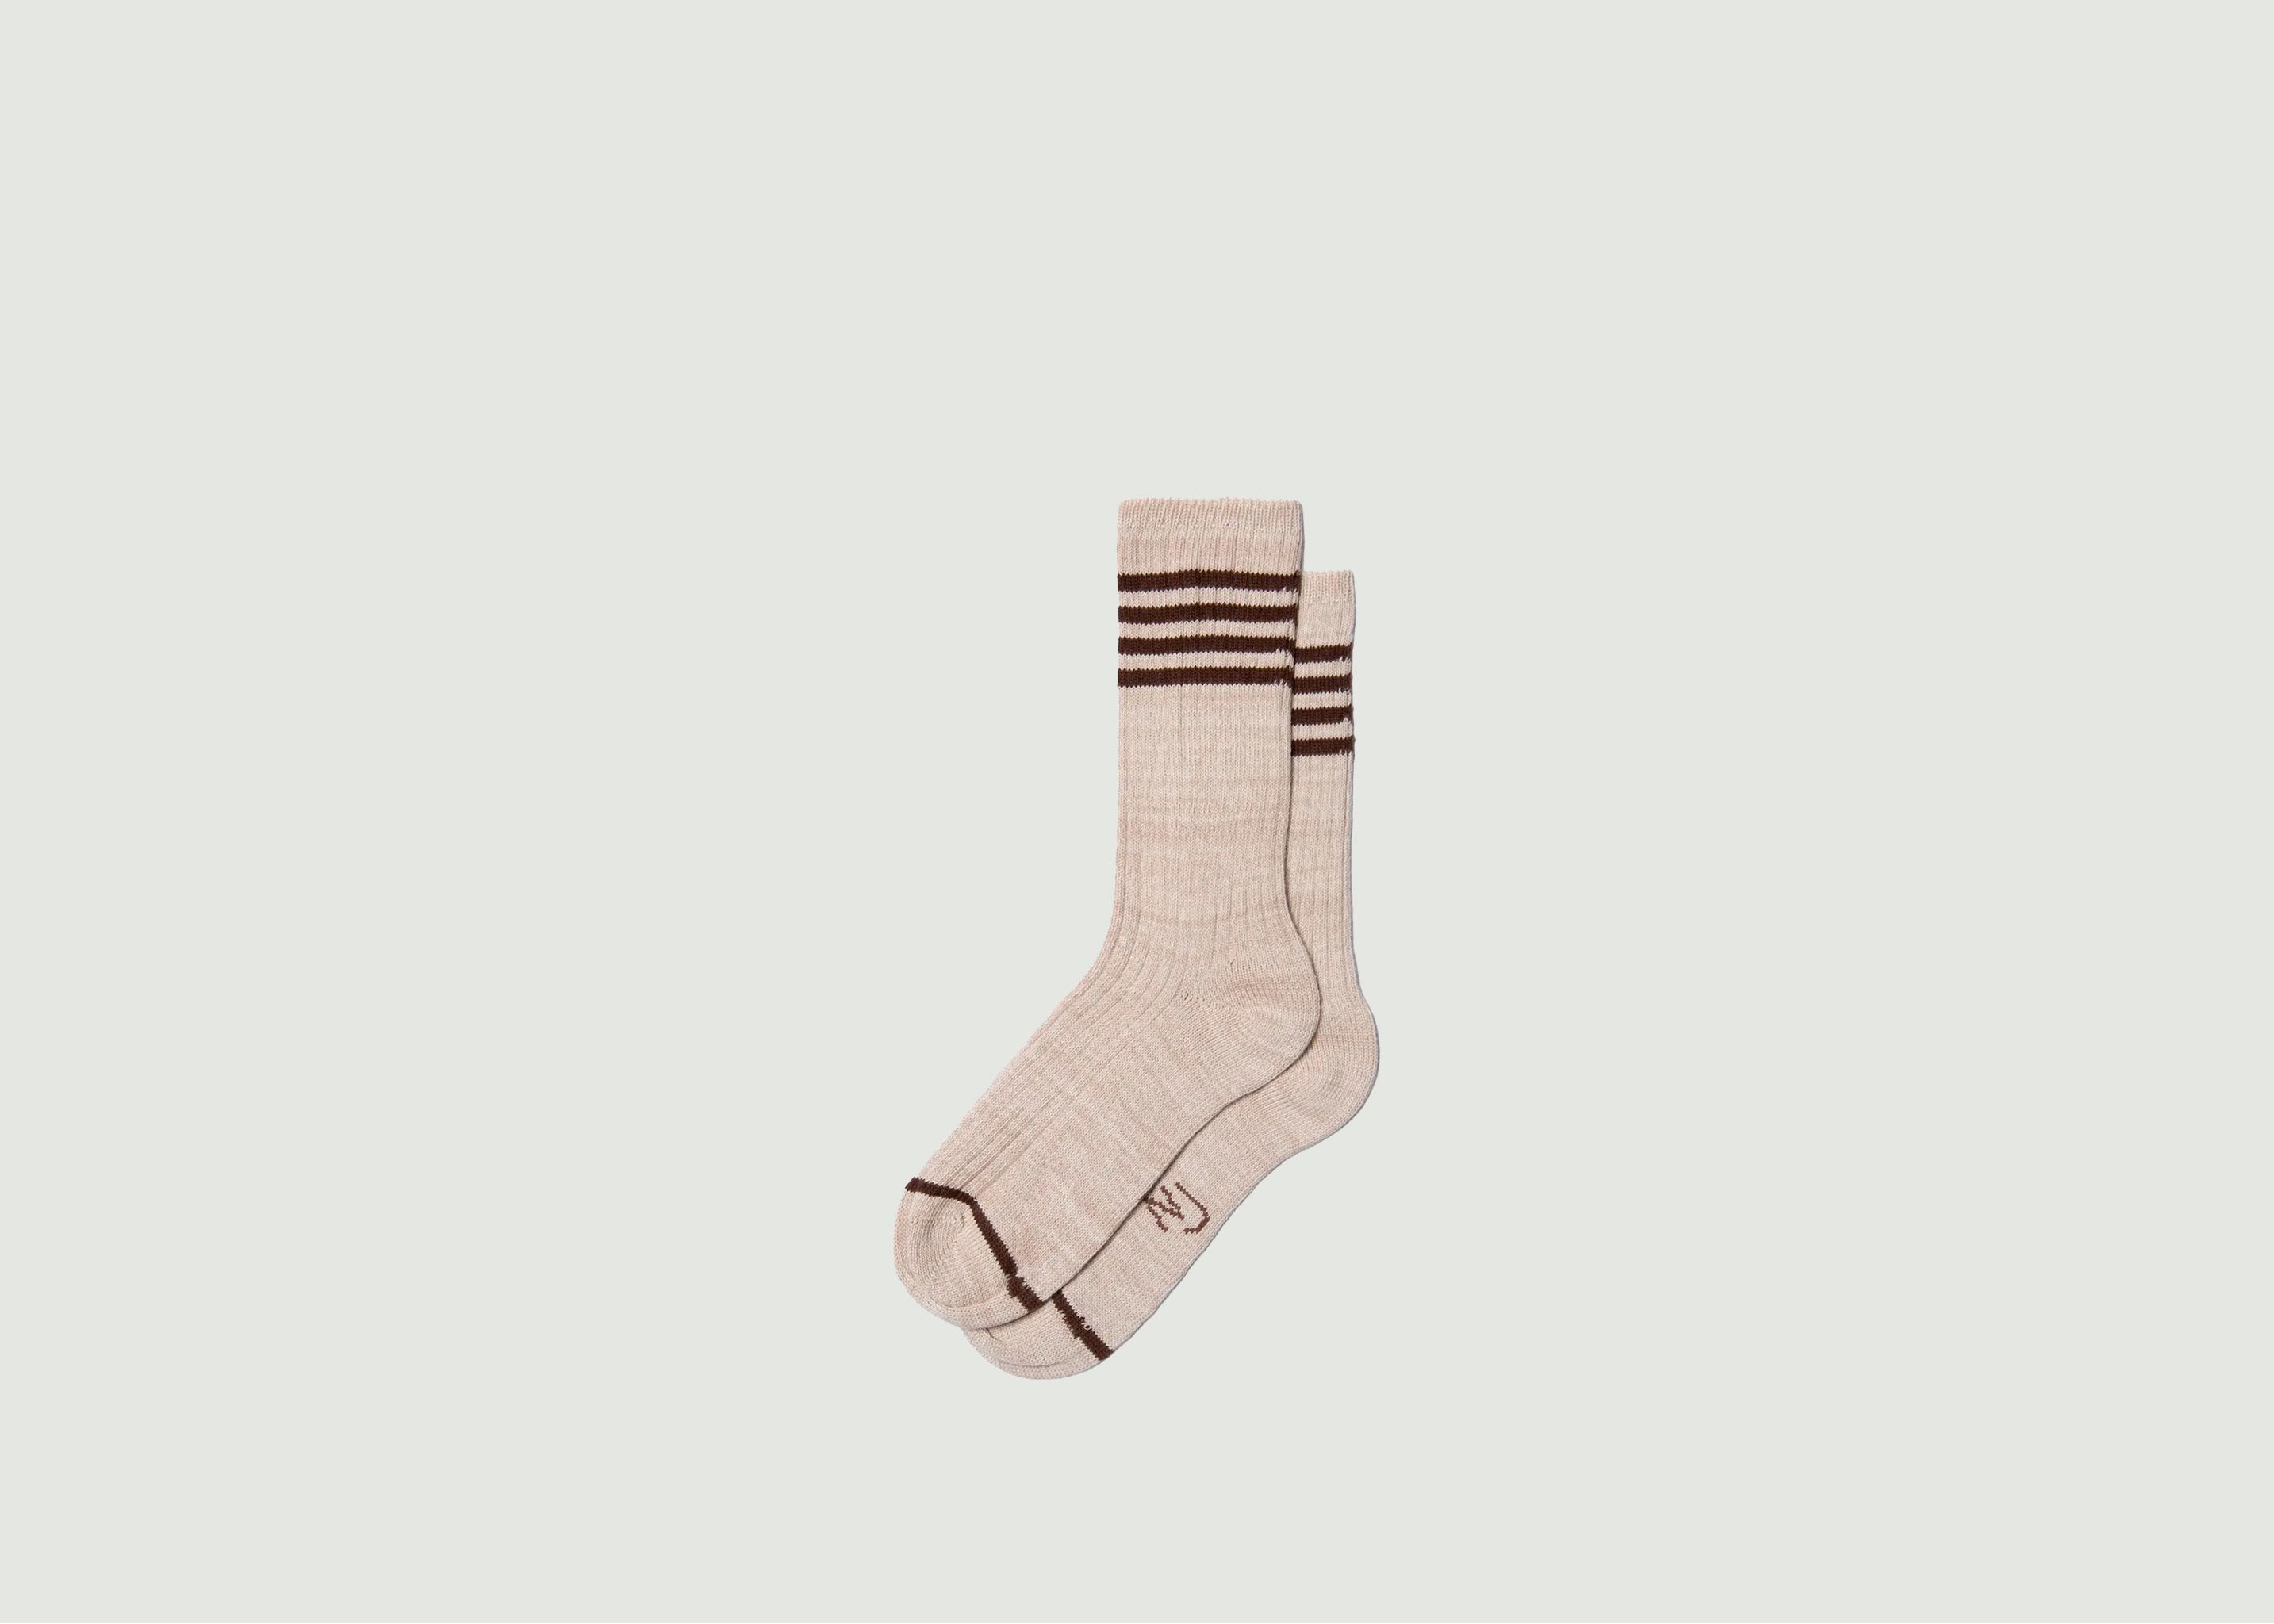 Chaussettes Tennis Rayées - Nudie Jeans